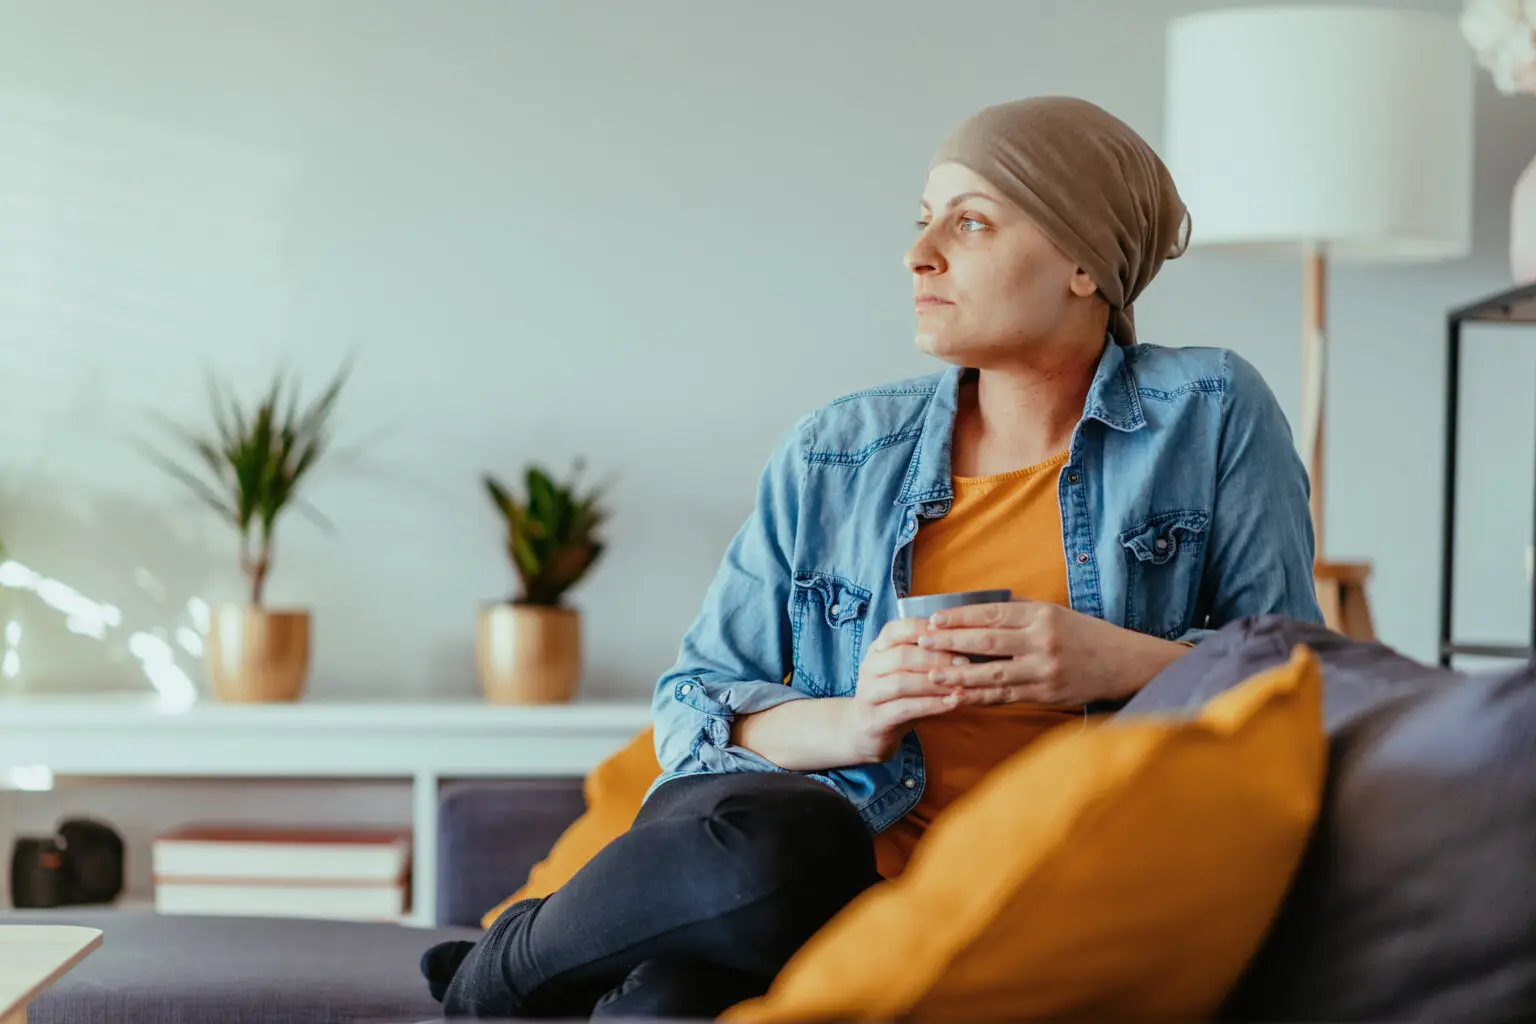 Day in a life of cancer patient - portrait of woman at home and office after chemotherapy due to lymph nodes cancer. Woman is 30 year old real cancer cured patient, photographs and videos taken weeks after last chemotherapy session